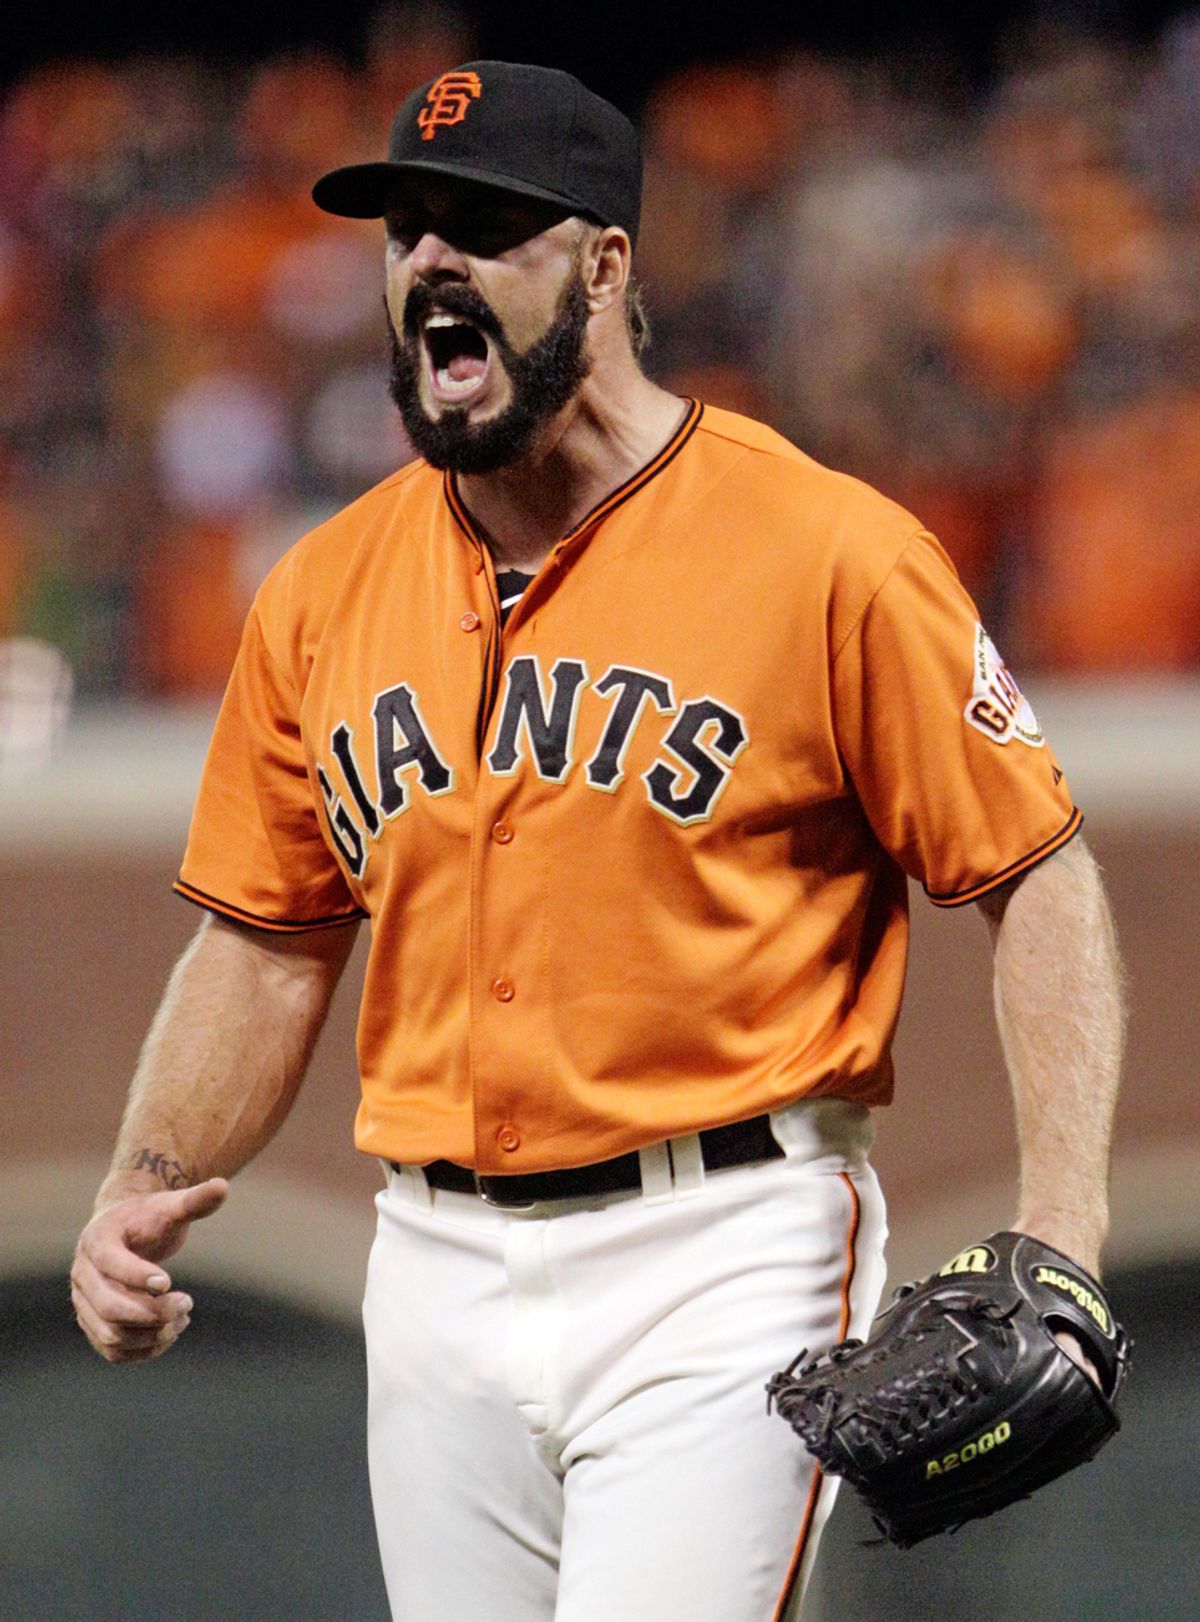 San Francisco Giants relief pitcher Brian Wilson shouts after striking out Atlanta Braves Derrek Lee for the third out in the ninth inning of Game 2 of the National League Division Series baseball game in San Francisco, Friday, Oct. 8, 2010. (AP Photo/Ben Margot) (Ben Margot)